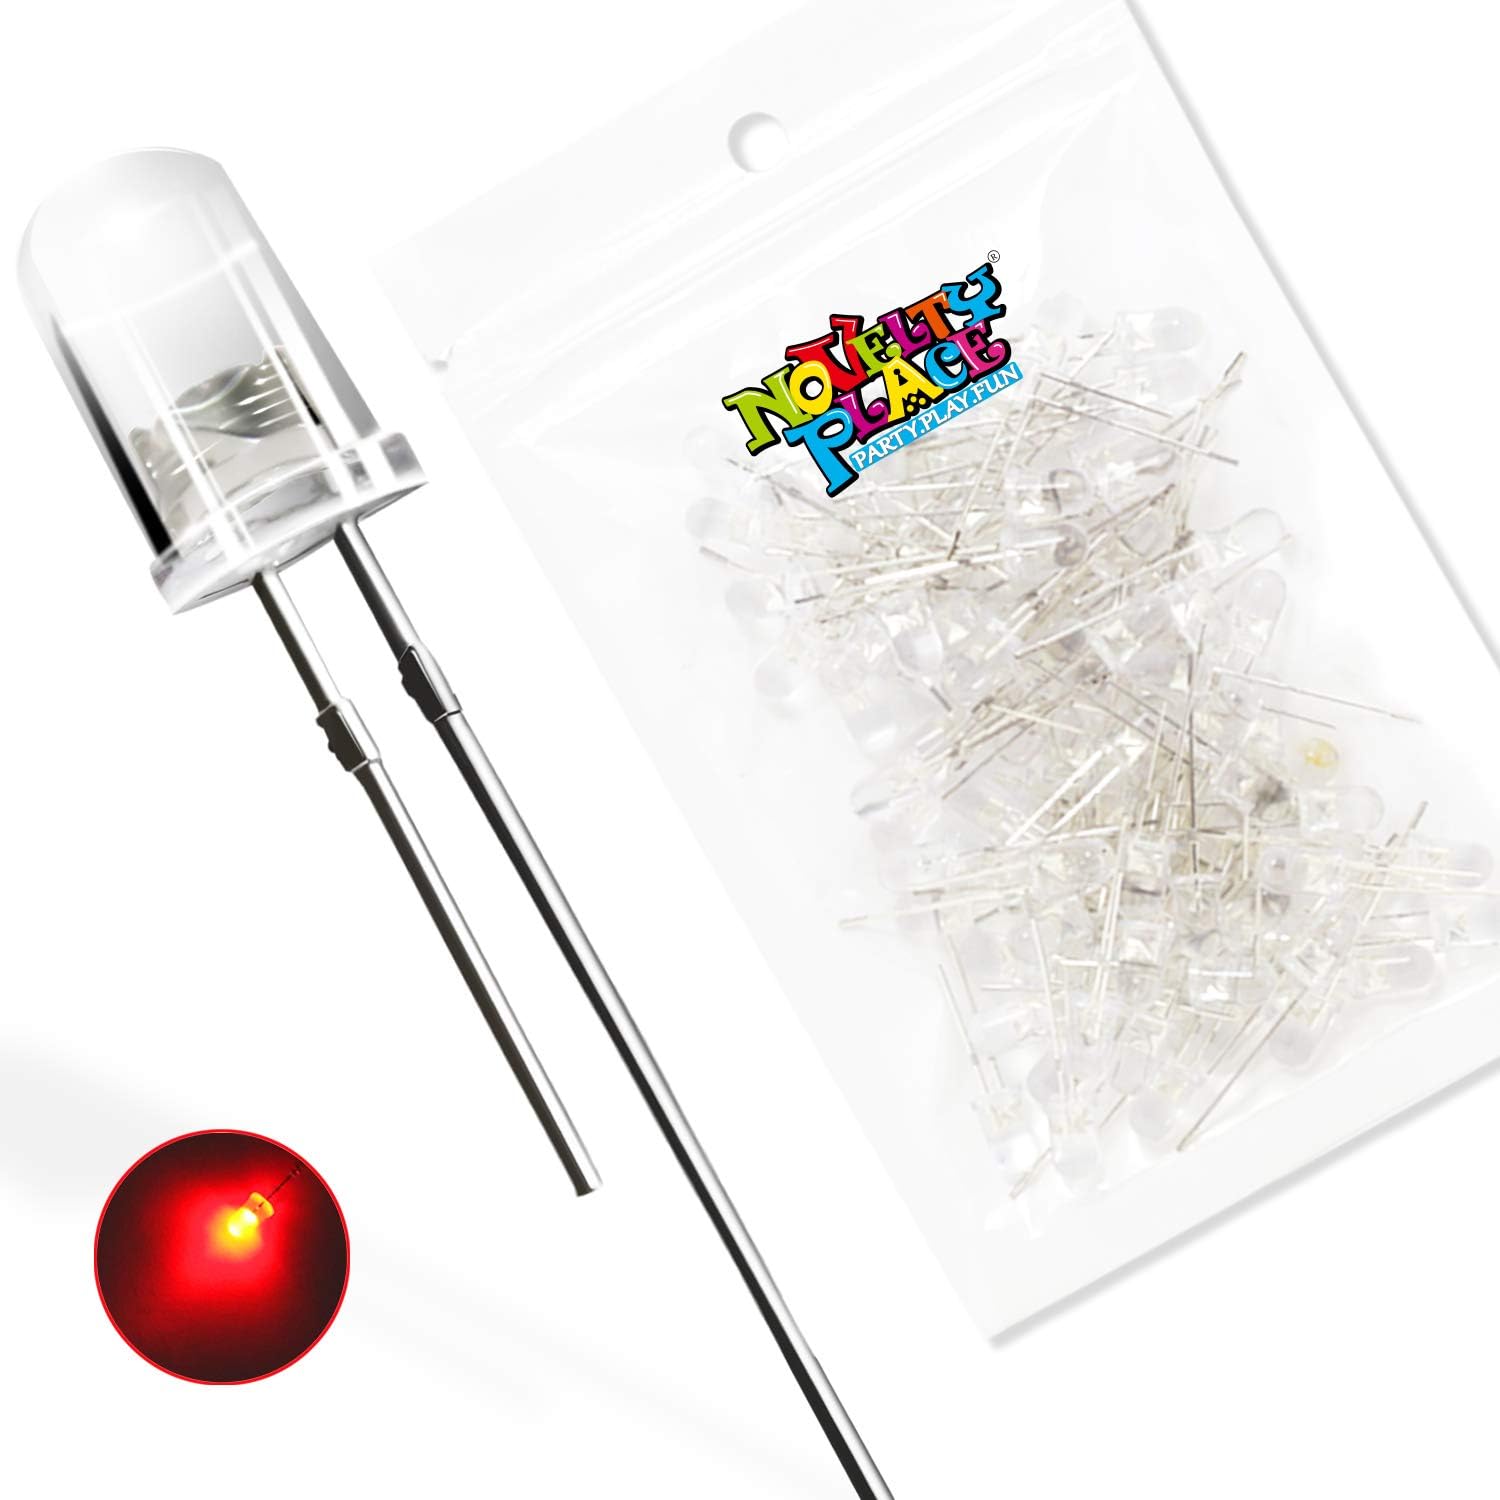 Novelty Place 100 Pcs 5mm Red LED Diode Lights - [Ultra Bright] Clear Transparent DC 2V 20mA Emitting Diodes LEDs Bulb - DIY Science Project Electronics Components Lighting Kit